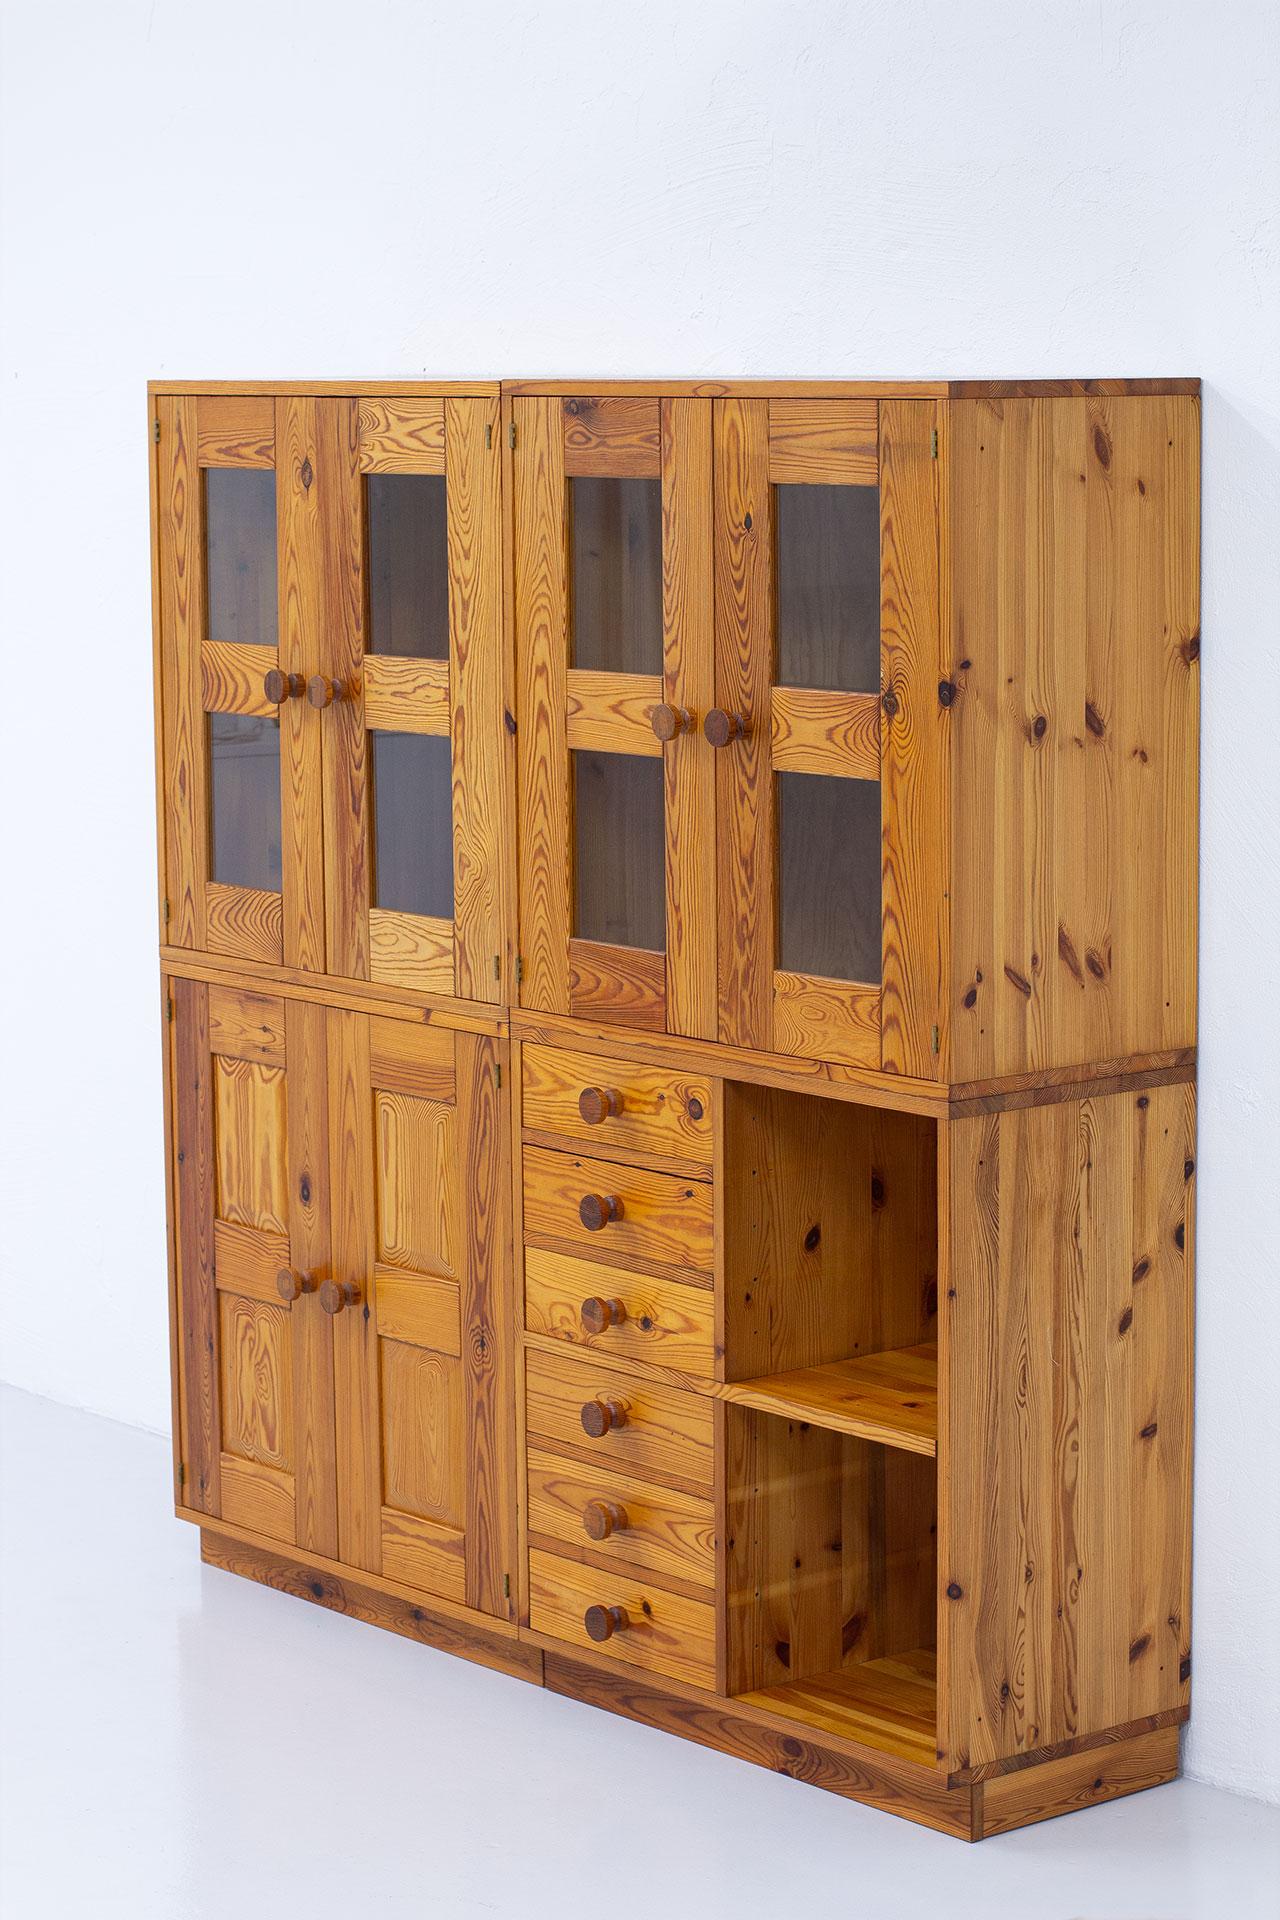 20th Century Solid Pine Cabinets, Vitrines & Chest by Luxus, Sweden, 1960s For Sale